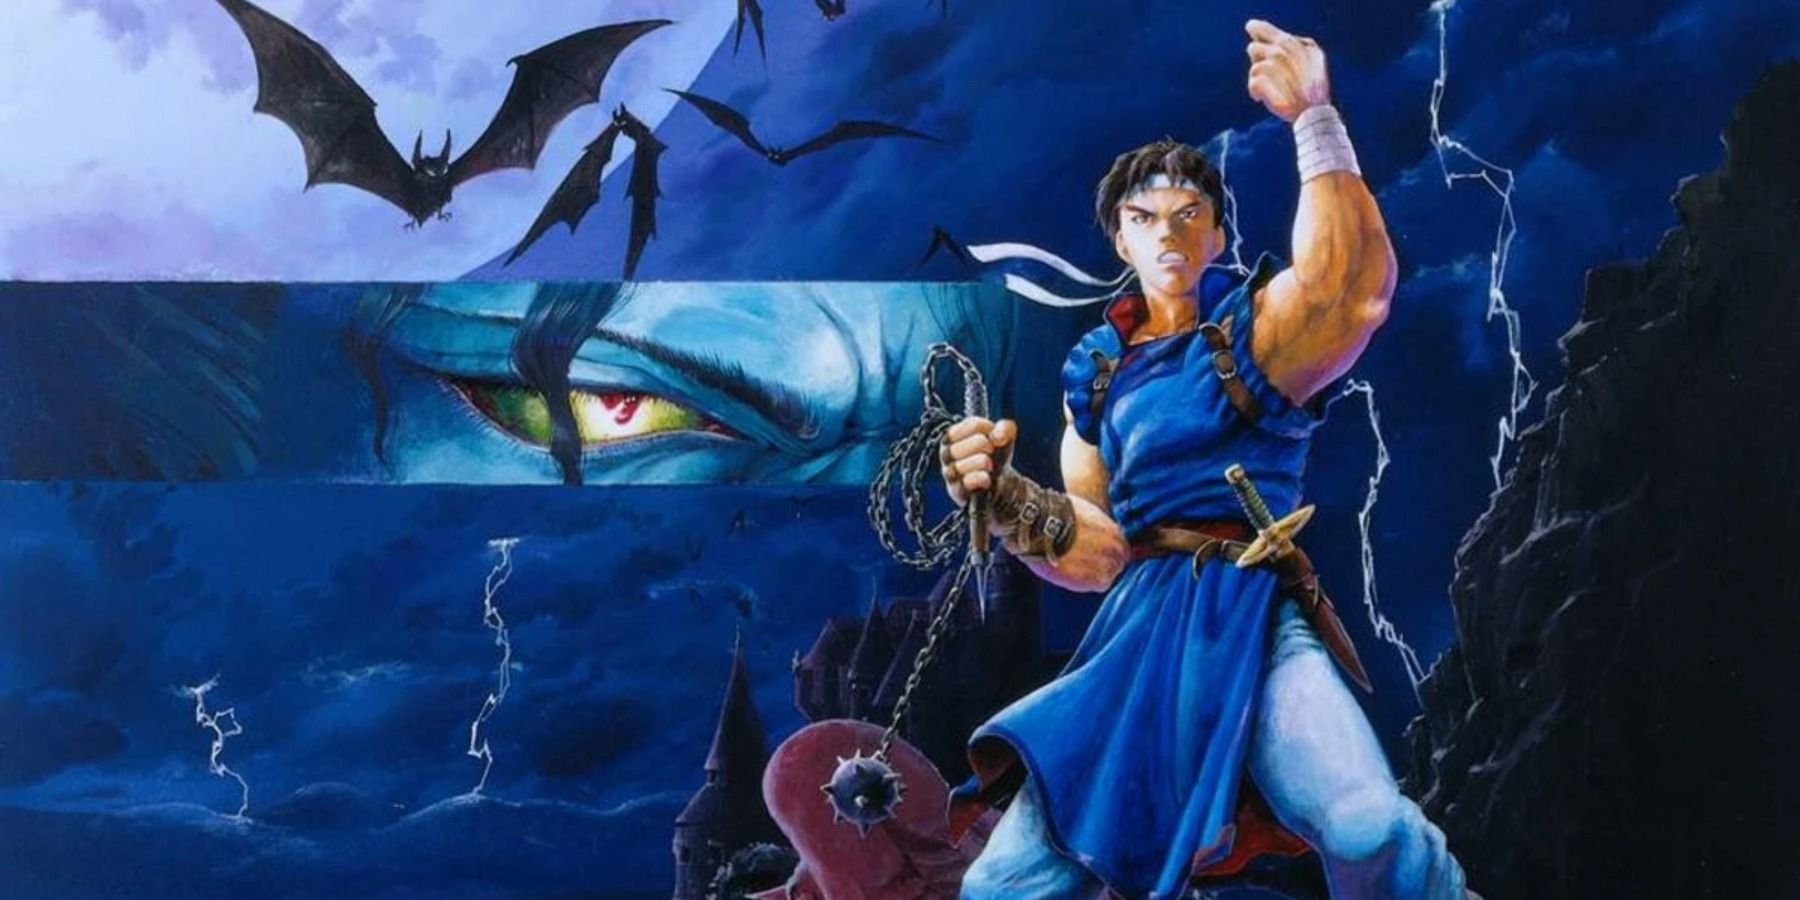 Castlevania Rondo of Blood Dracula X Super Nintendo Cover with Richter